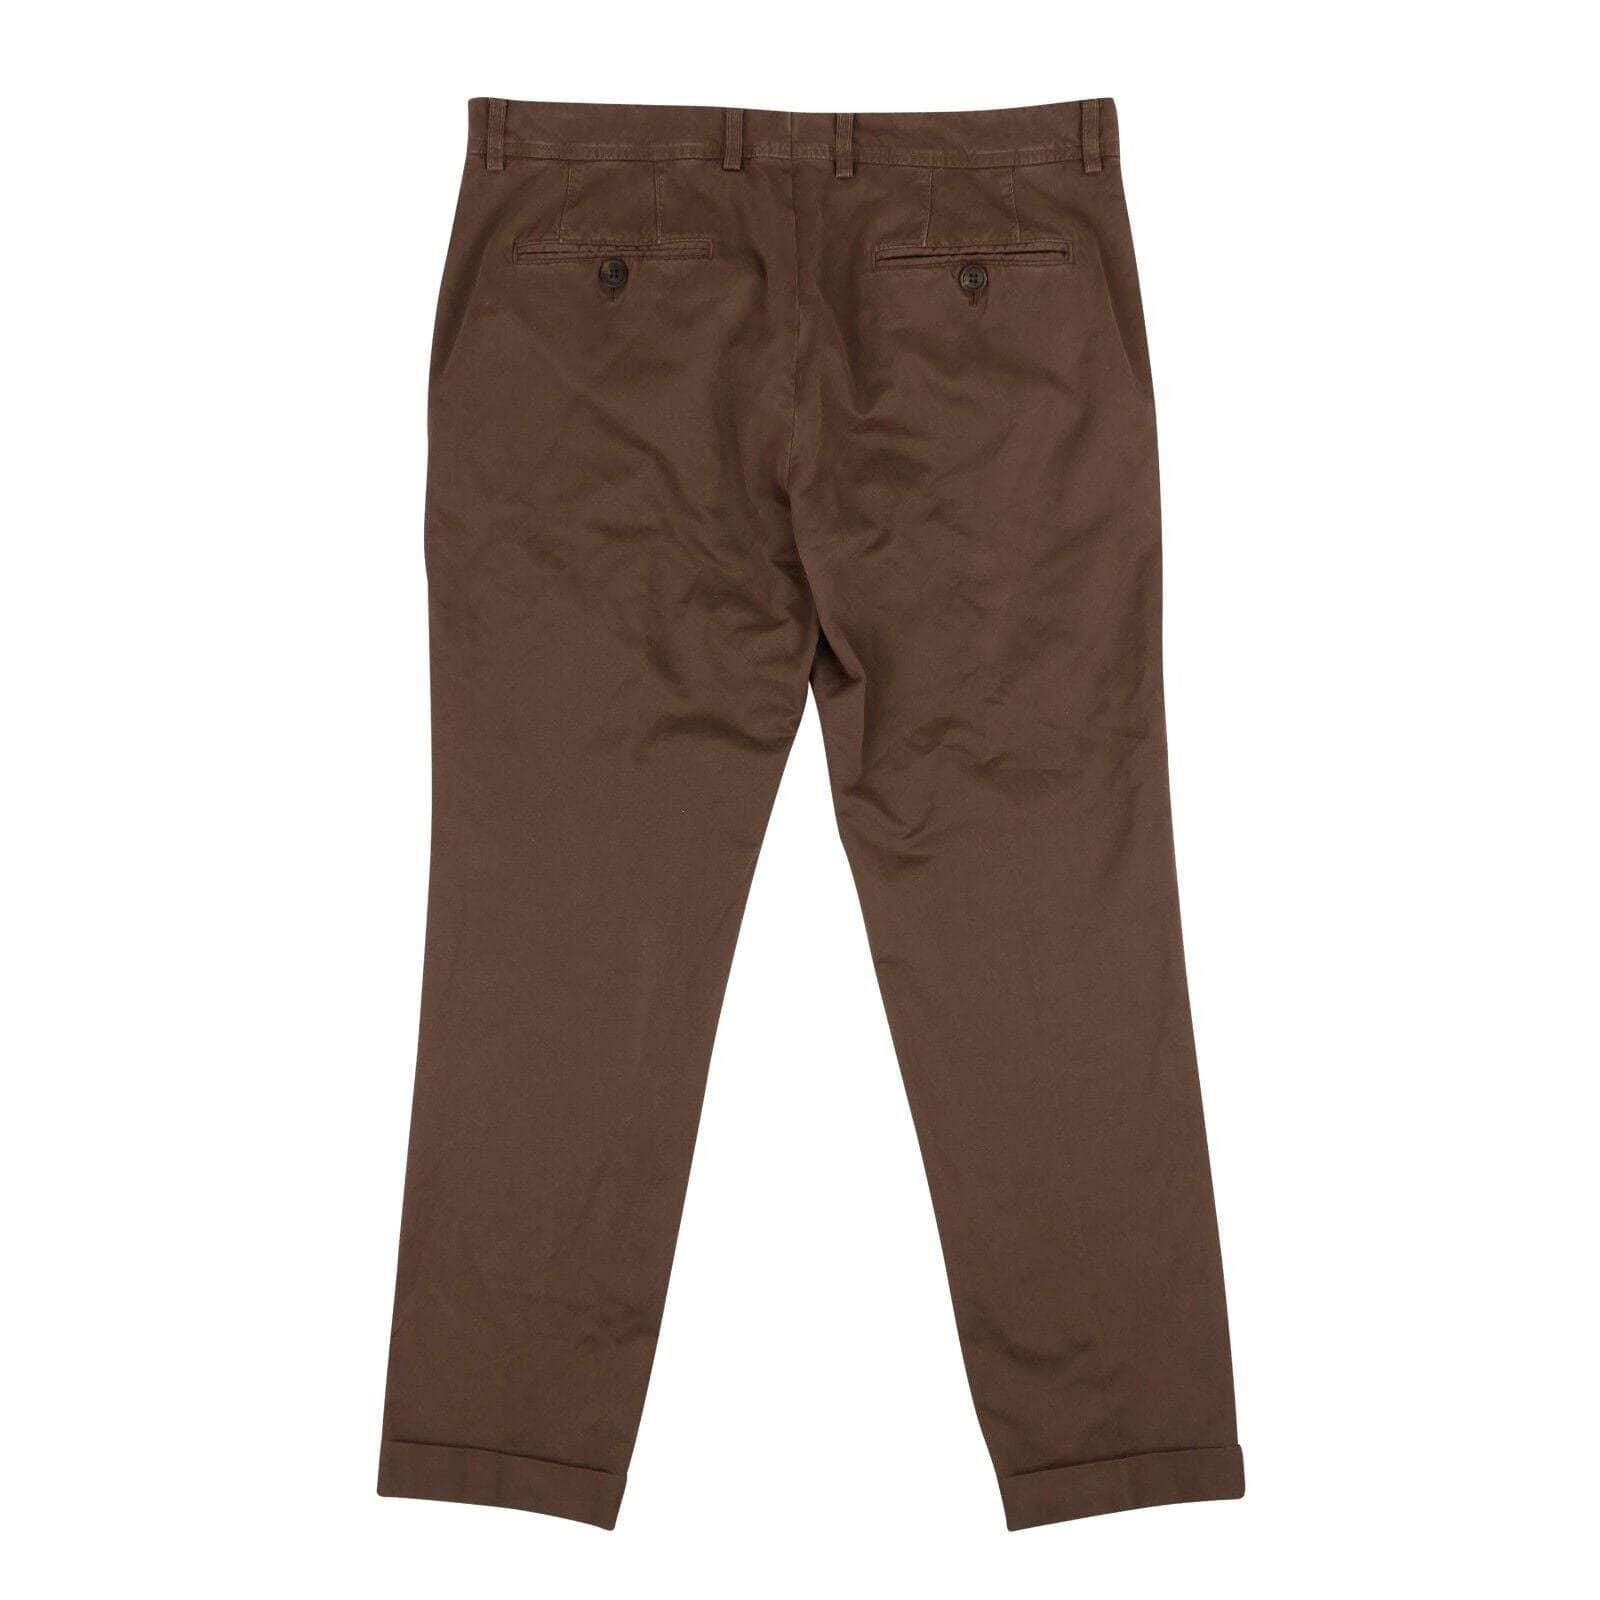 Brunello Cucinelli 500-750, brunello-cucinelli, couponcollection, gender-mens, main-clothing, mens-casual-pants, mens-shoes, size-50 50 Brown Cotton Blend Chino Pants 95-BRC-1002/50 95-BRC-1002/50